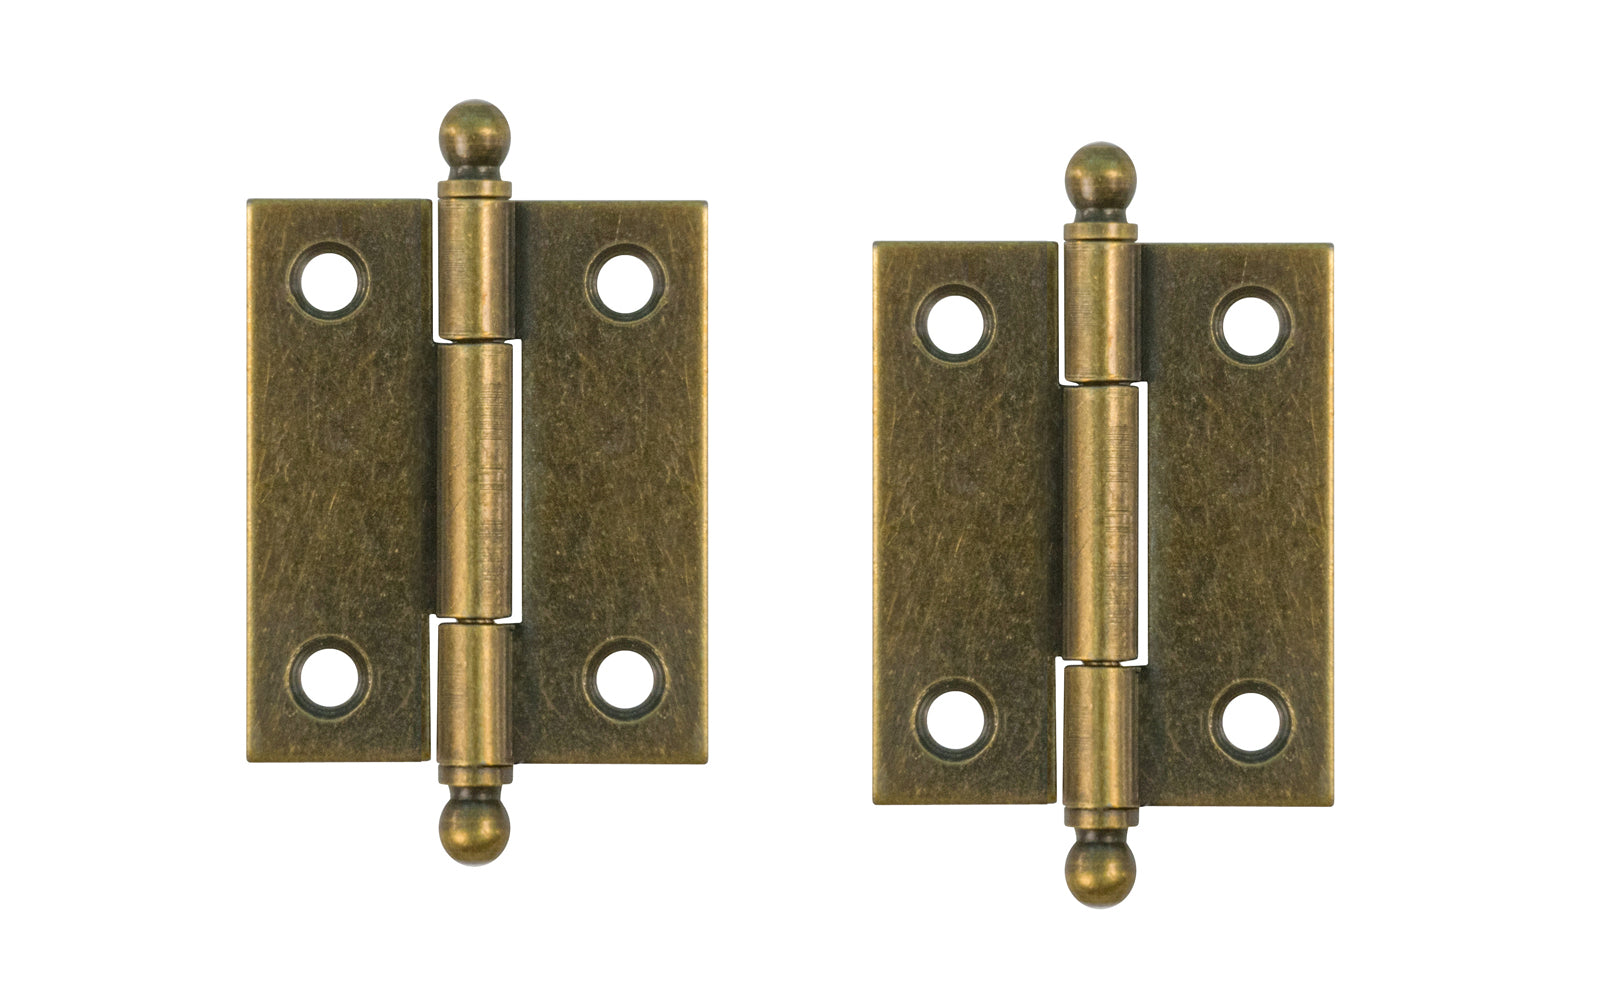 Traditional & classic ball-tip steel cabinet hinges with loose pins. Removable hinge pins makes for easy installation when working with cabinets. 1-15/16" high x 1-5/8" wide. Sold as a pair of hinges. Antique Brass Finish.